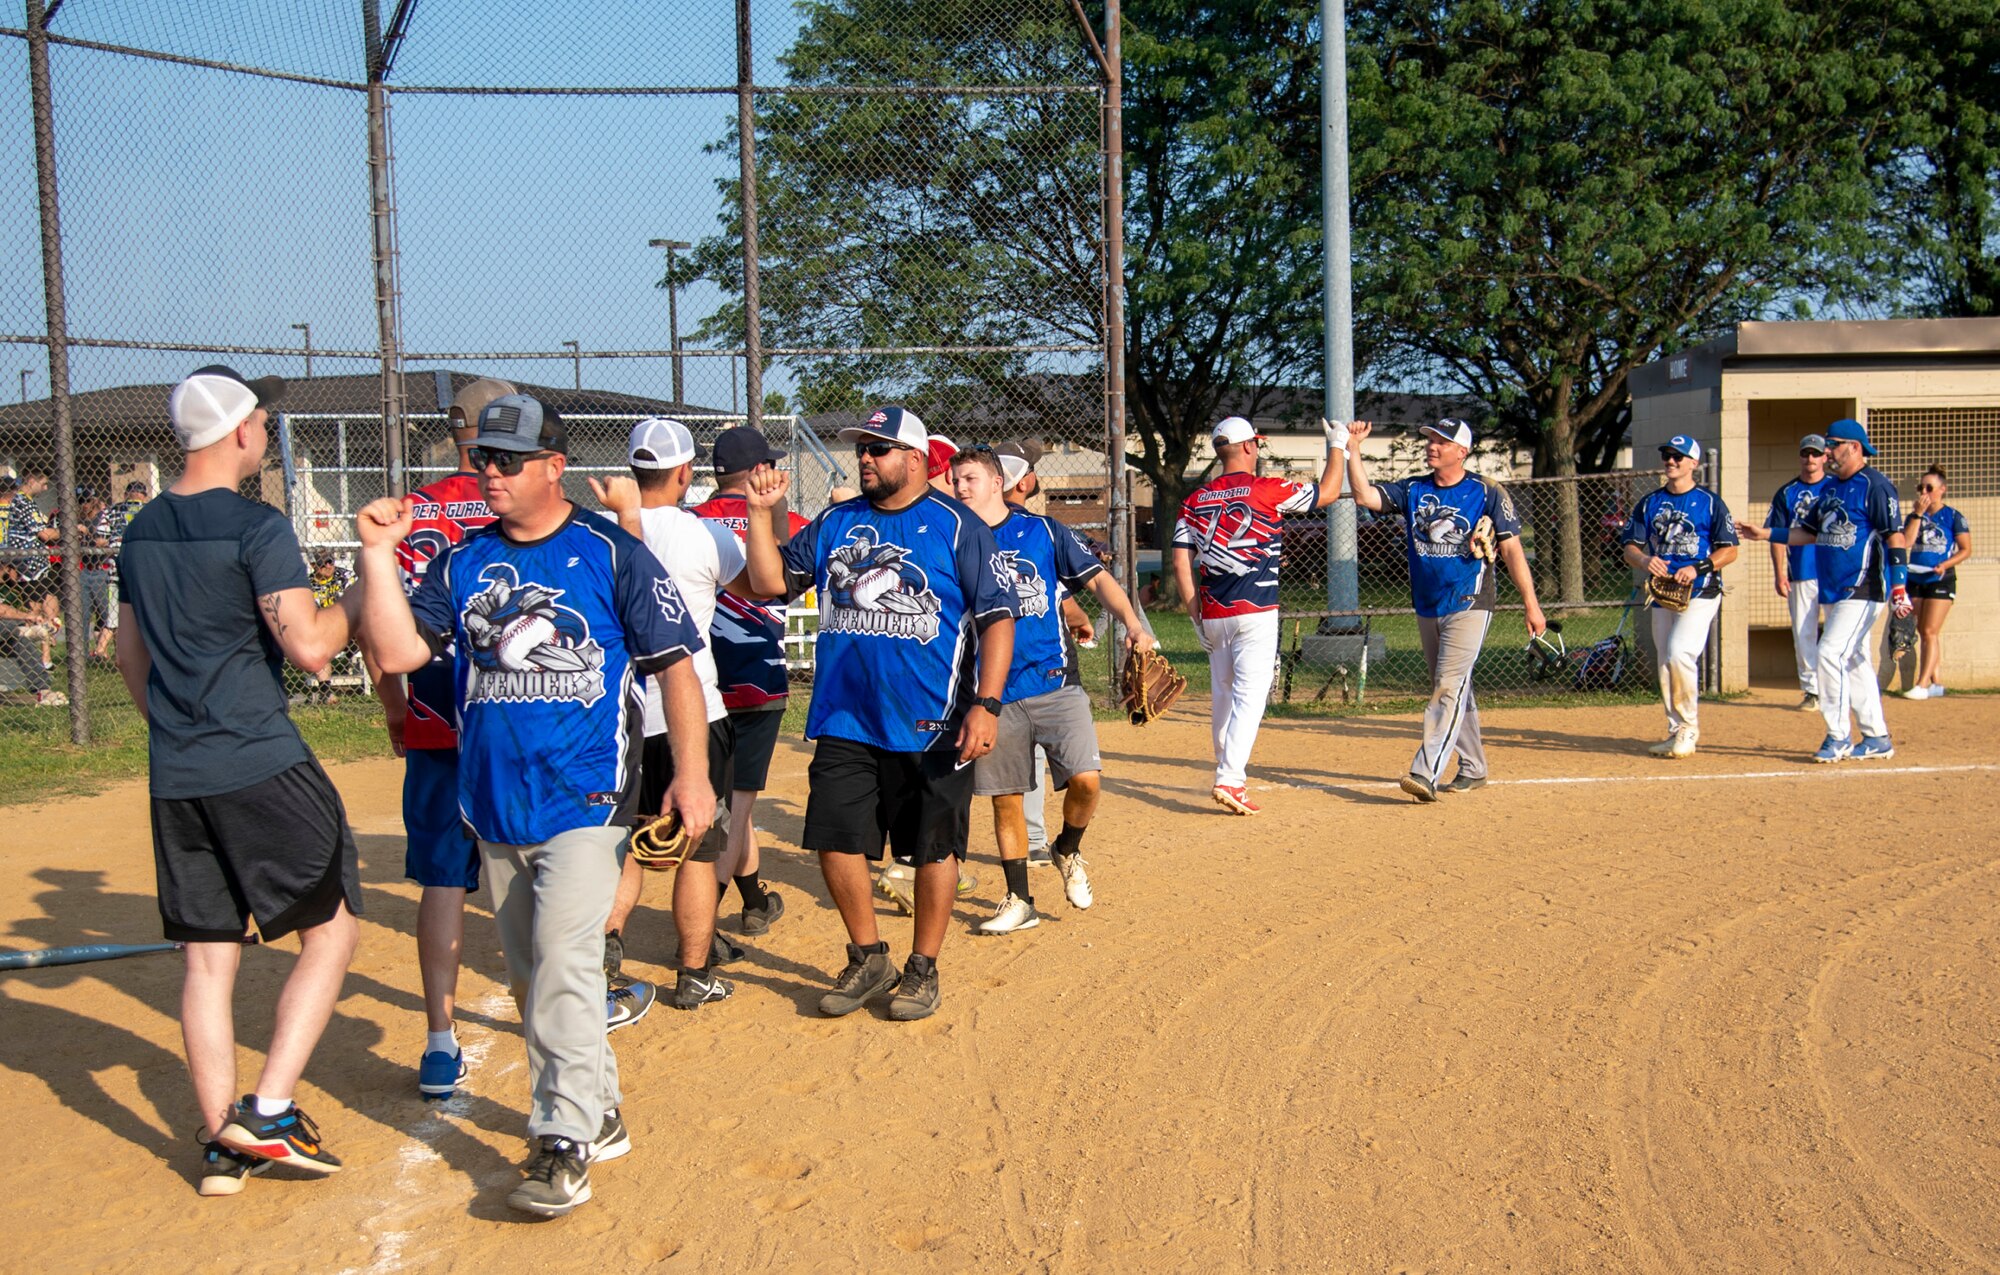 Airmen from the 436th Security Forces Squadron and 436th Maintenance Squadron Isochronal Maintenance Dock congratulate each other after an intramural softball game on Dover Air Force Base, Delaware, July 26, 2021. The 436th SFS won the game 13-4. (U.S. Air Force photo by Tech. Sgt. Nicole Leidholm)